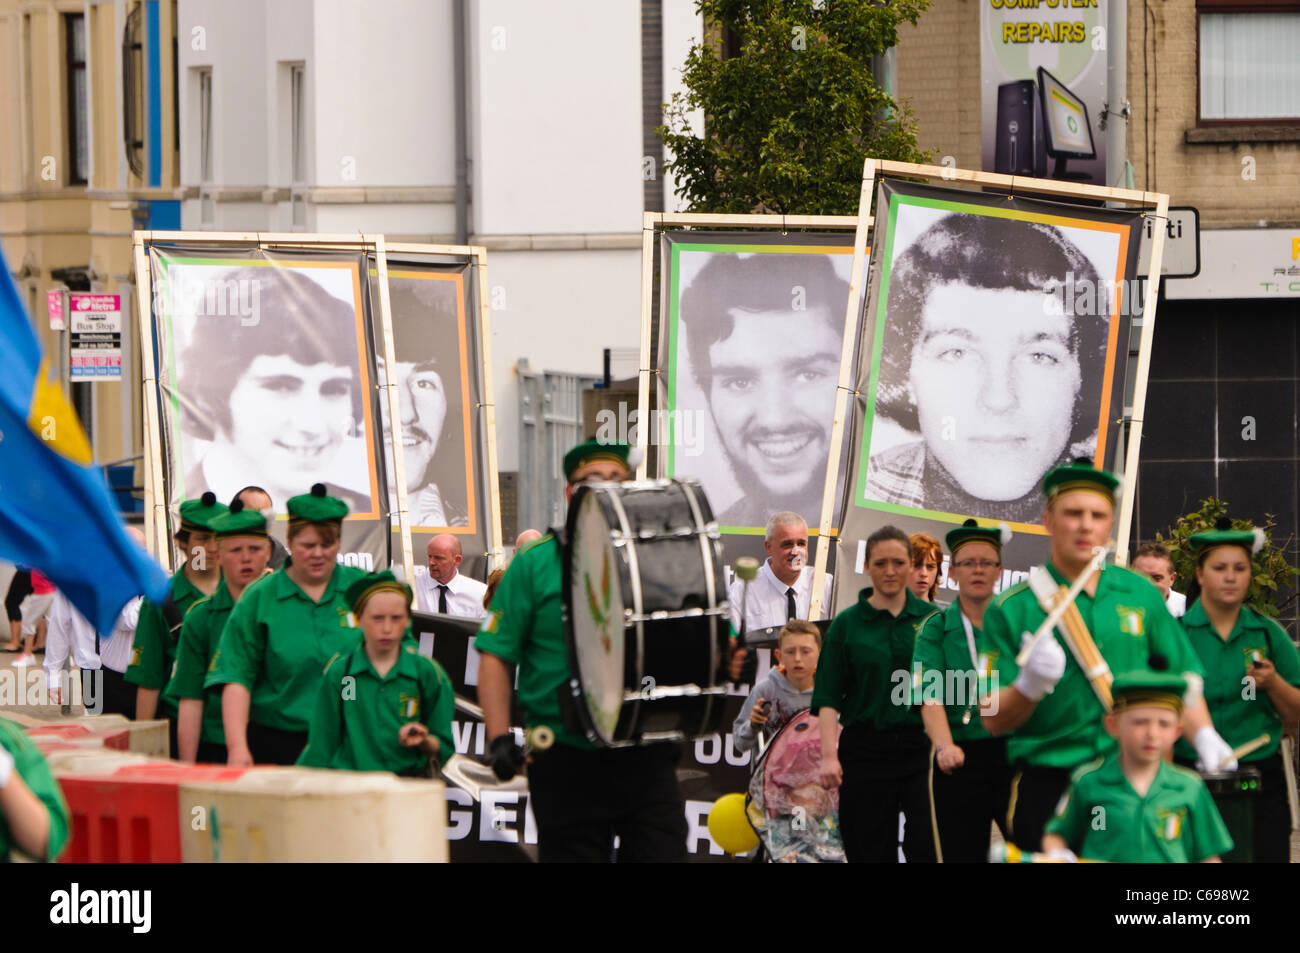 Belfast, Northern Ireland 21 Aug 2011 - Dissident Republicans commemorate the 1981 Hunger Strikes Stock Photo